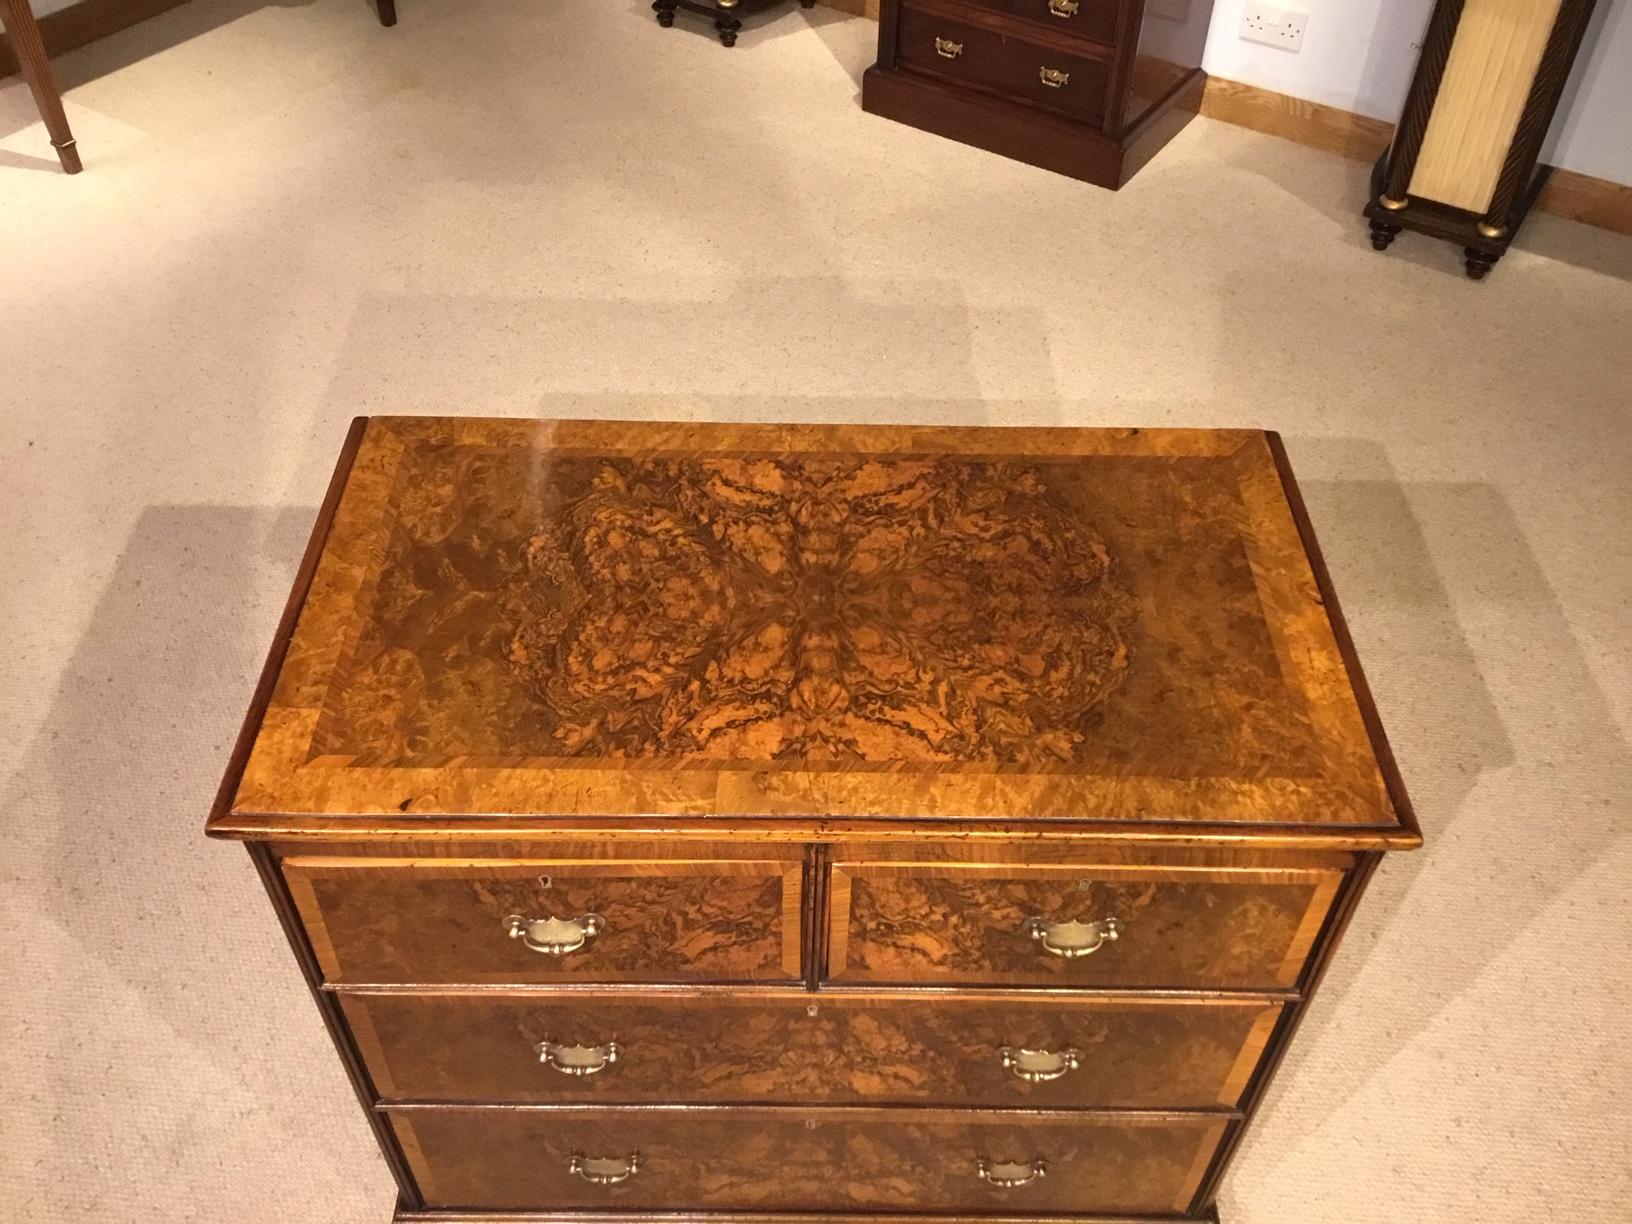 A burr walnut Georgian style antique chest of drawers by Heals of London. Having a rectangular top veneered in burr walnut with walnut banding above an arrangement of two short and two long rectangular drawers with beautifully veneered burr walnut